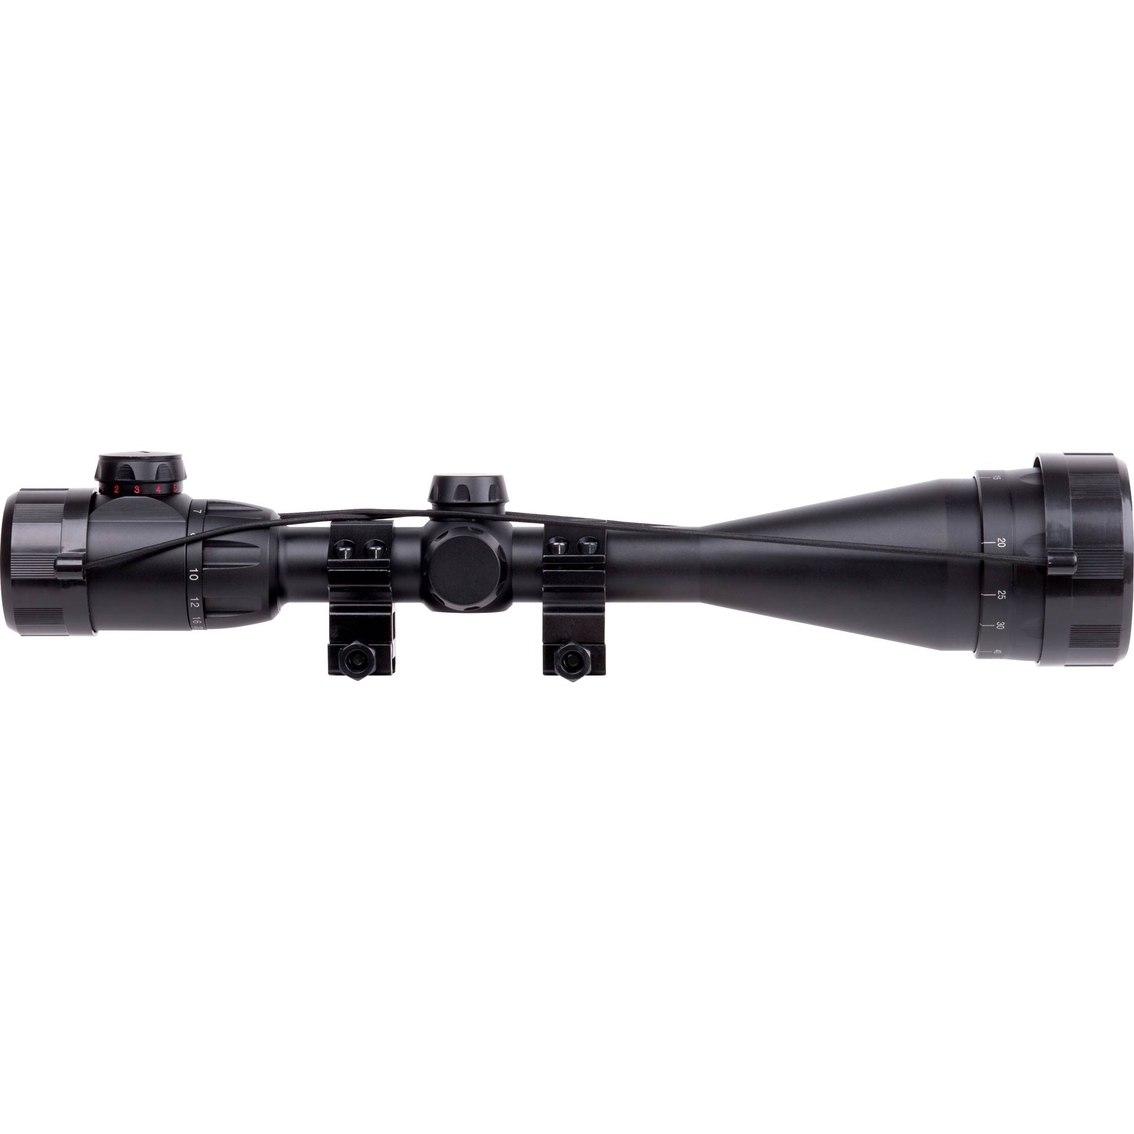 Centerpoint 6-20x50mm TAG Scope - Image 2 of 2